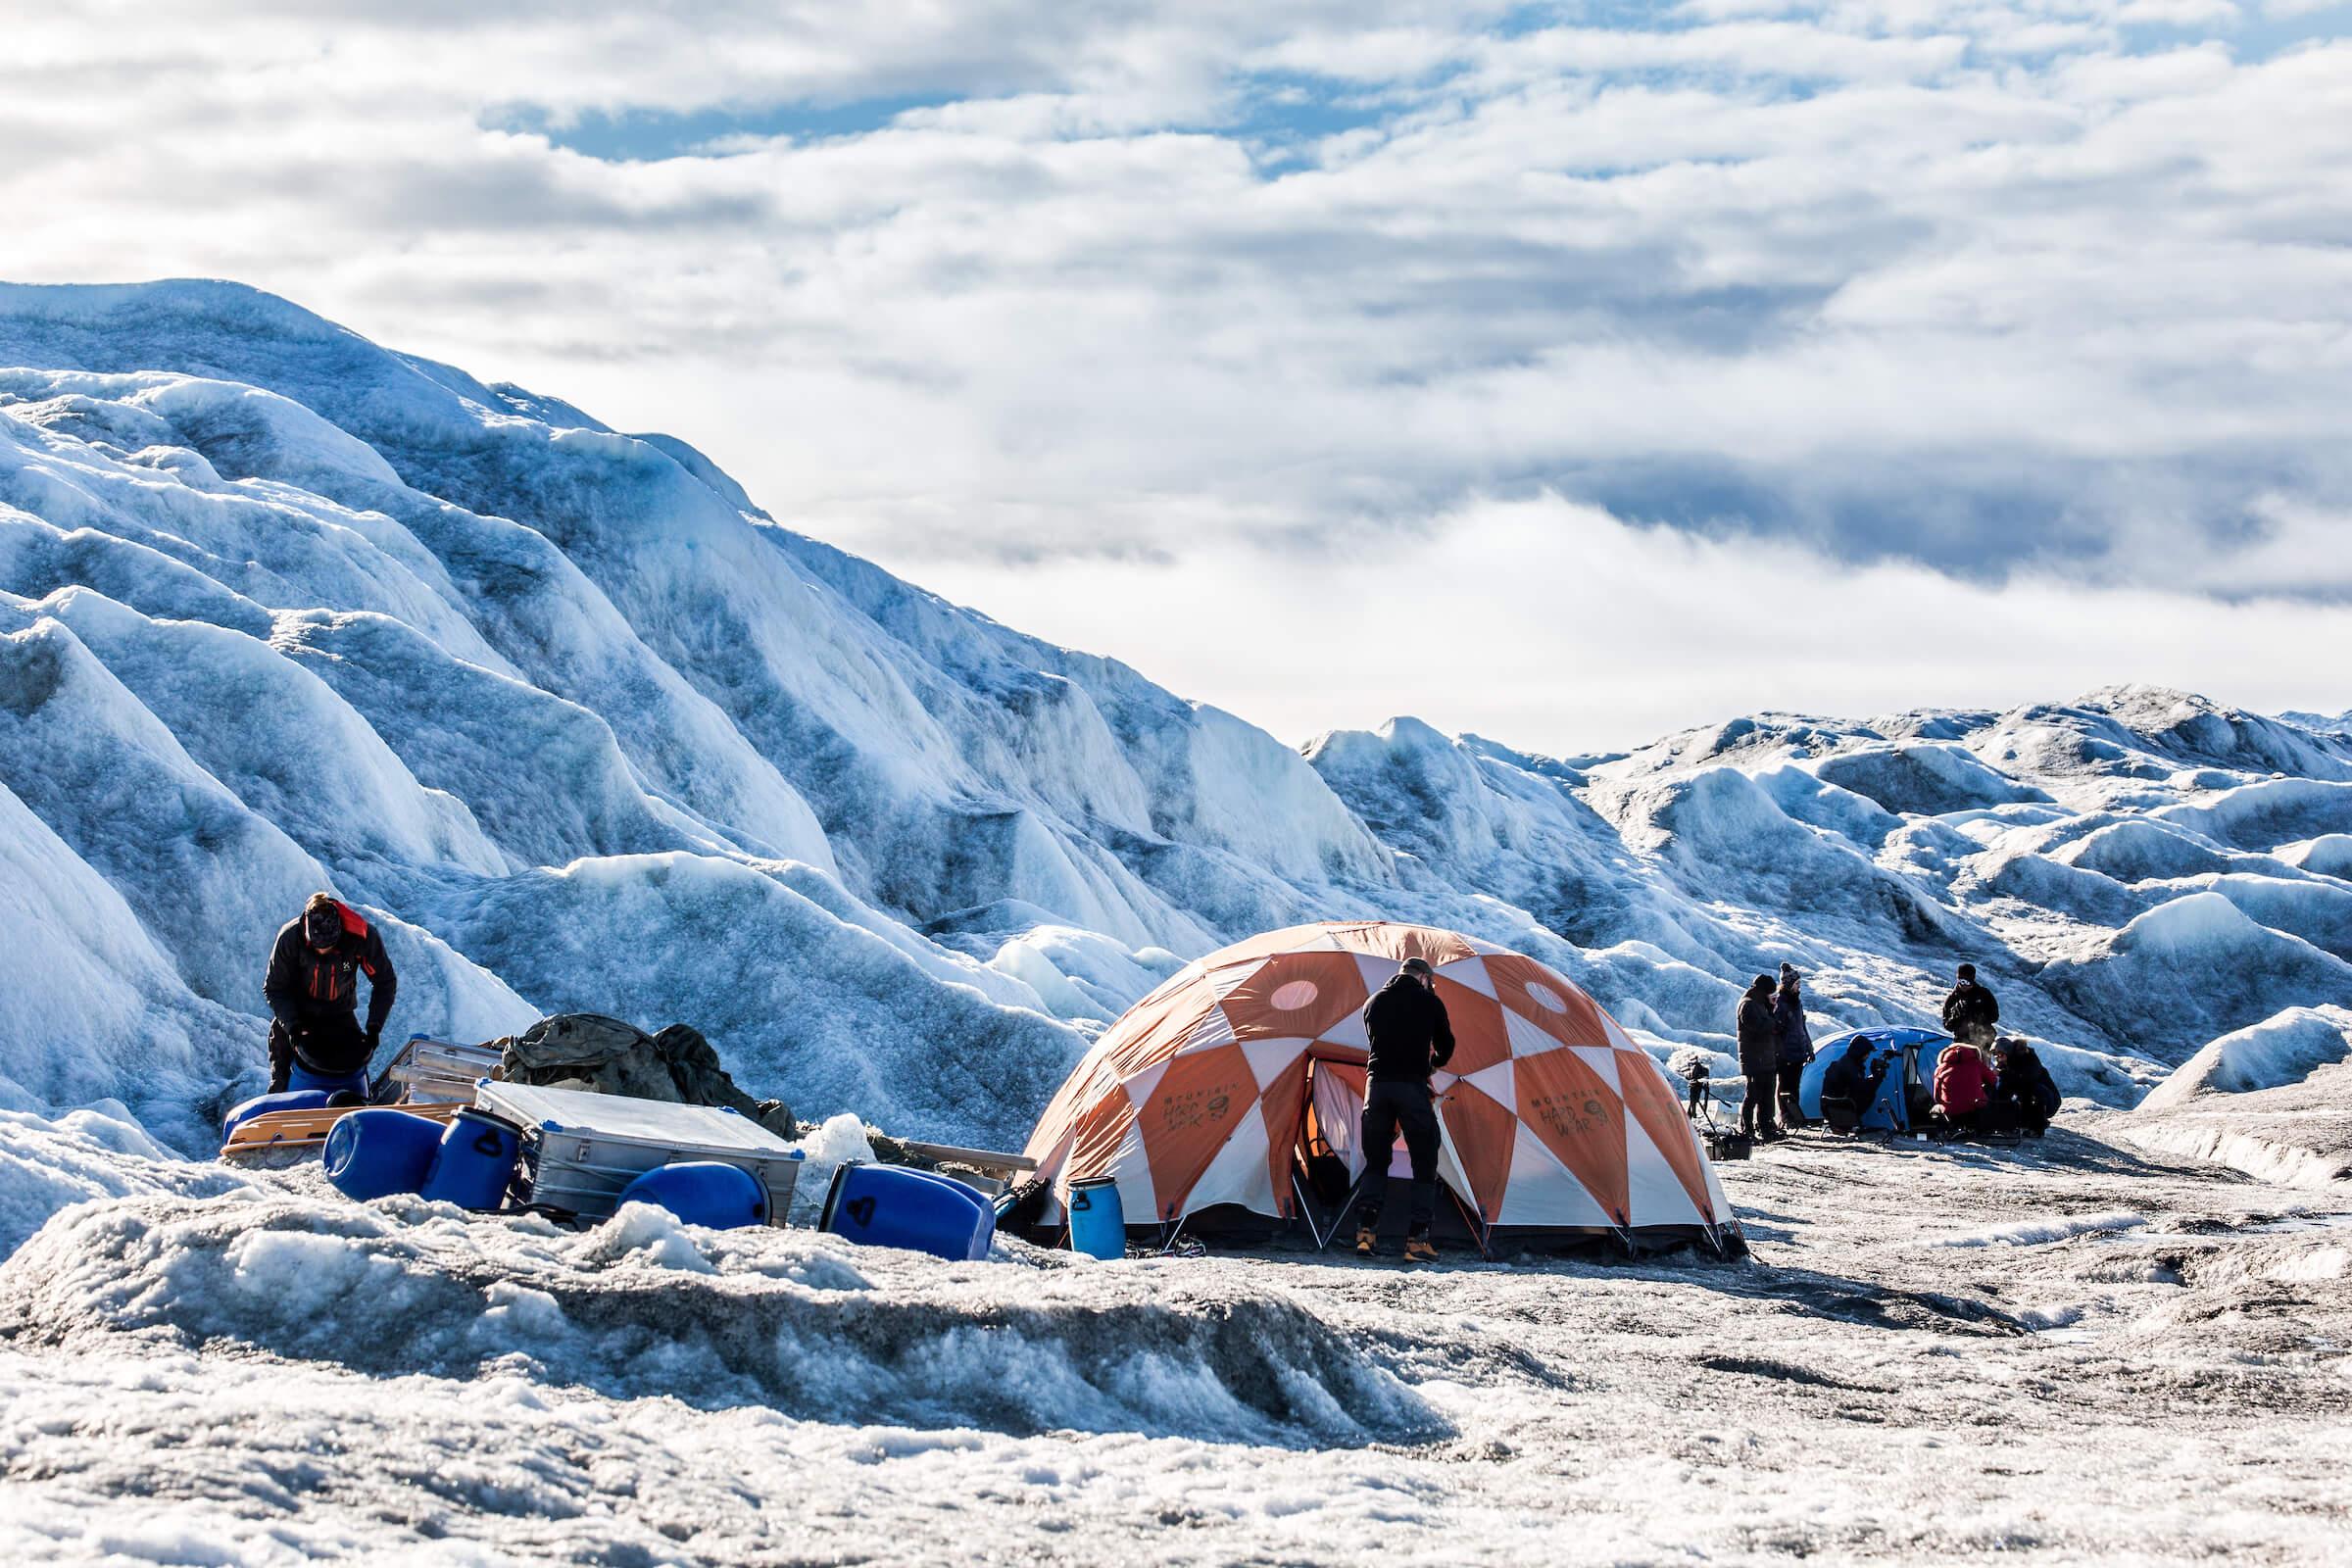 Adventurers settling in at Camp Ice Cap on the Greenland Ice Sheet, run by Albatros Arctic Circle in Kangerlussuaq. Photo by Raven Eye Photography